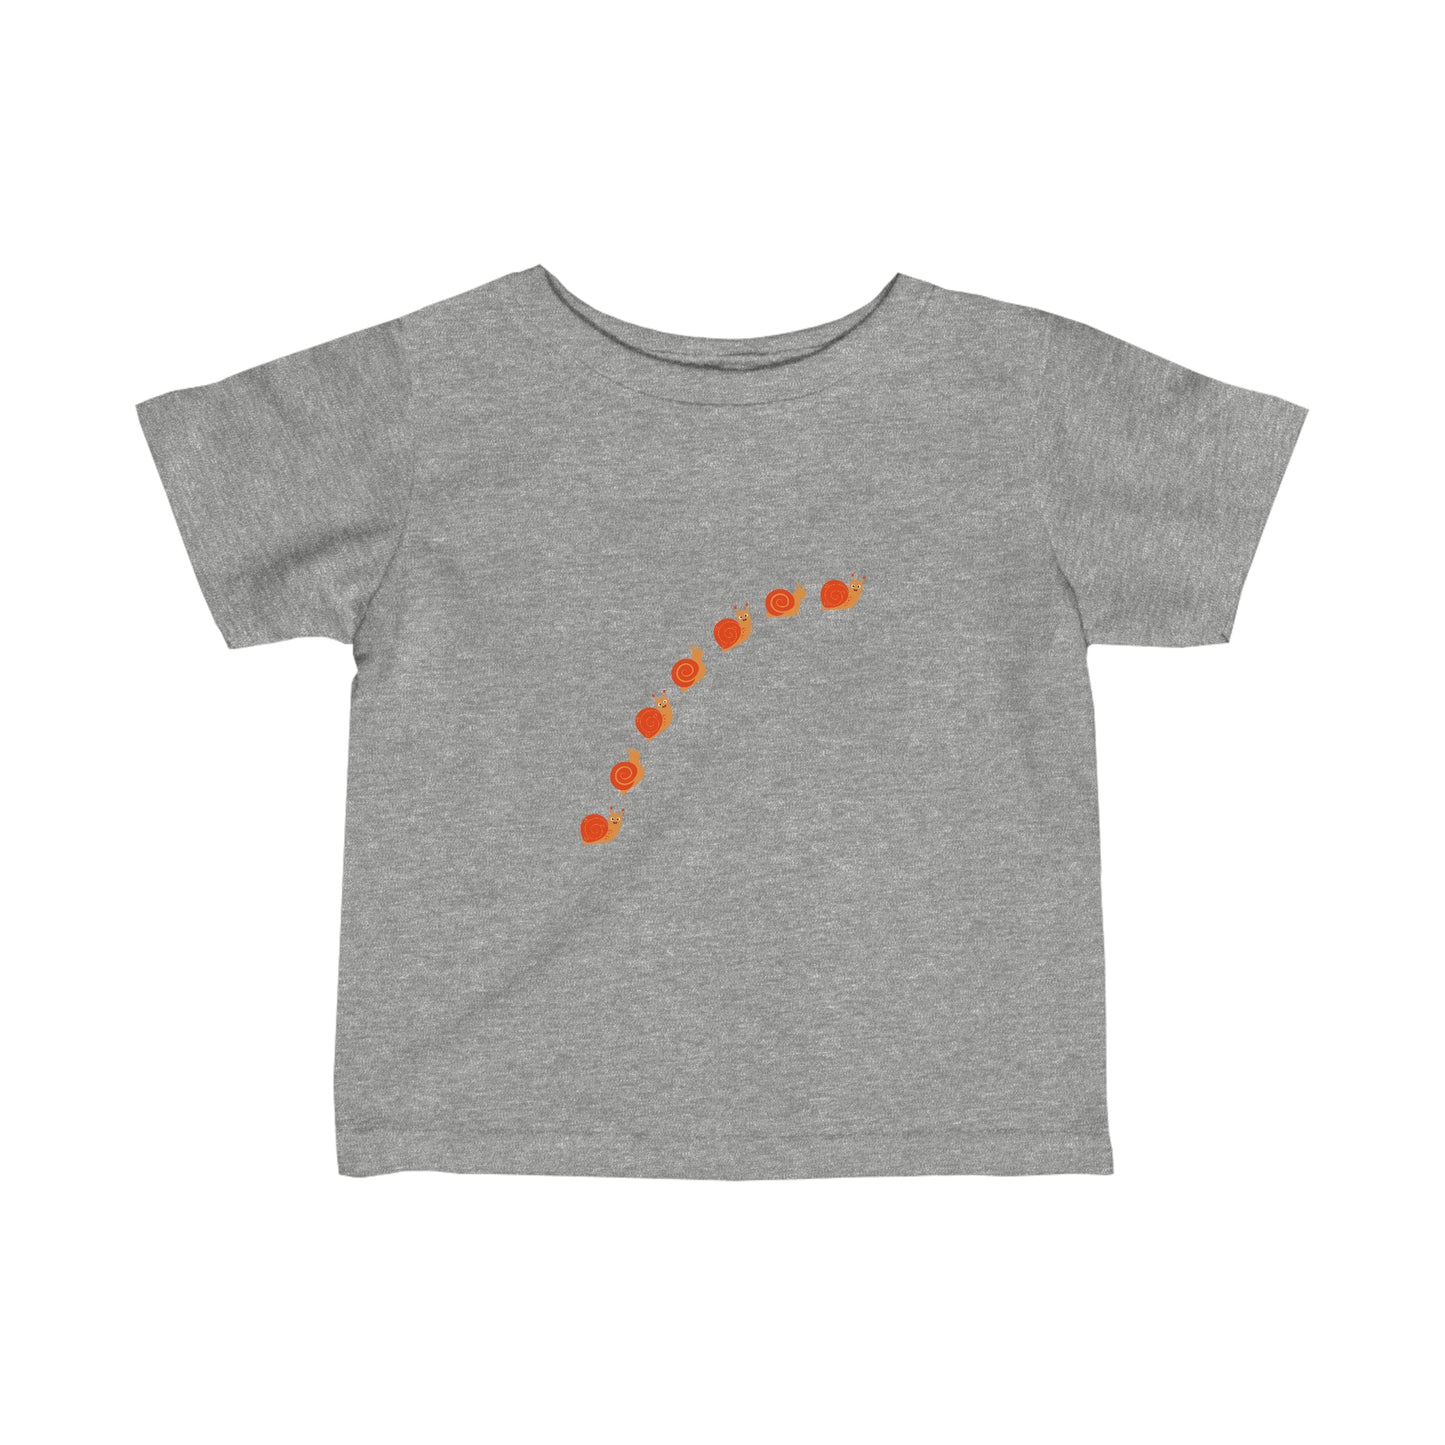 Snail Crossing Bug- Baby, Infant, Toddler, Soft Cotton, T-shirt